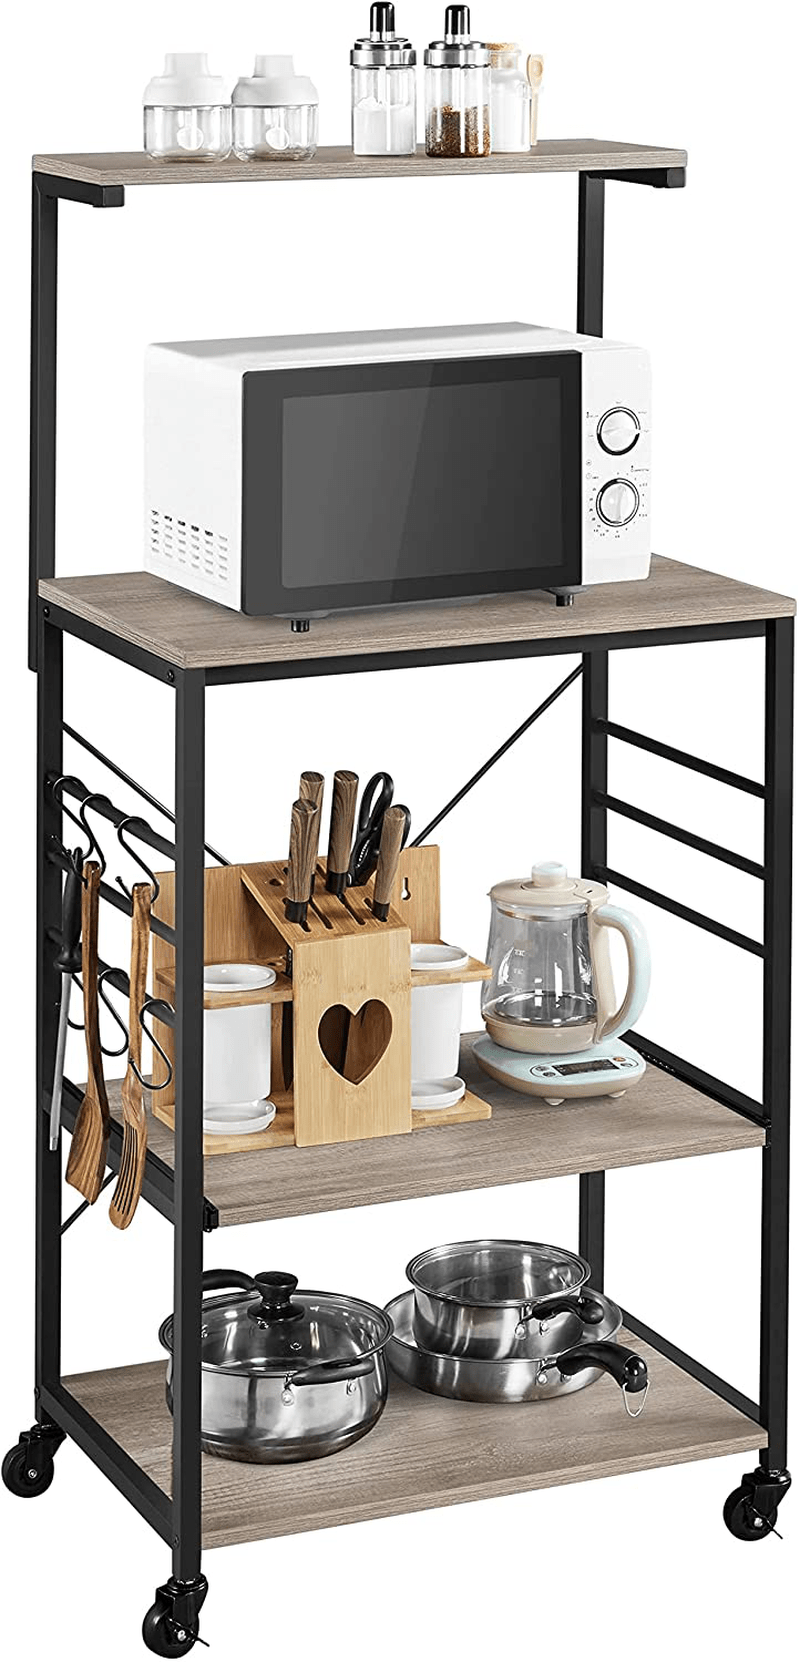 Yaheetech 4-Tier Rolling Bakers Rack for Kitchen with Storage and Sliding Shelf, Utility Microwave Oven Stand Cart Spice Rack Kitchen Organizer on Wheels with 6 Hooks and Adjustable Feet, Rustic Brown